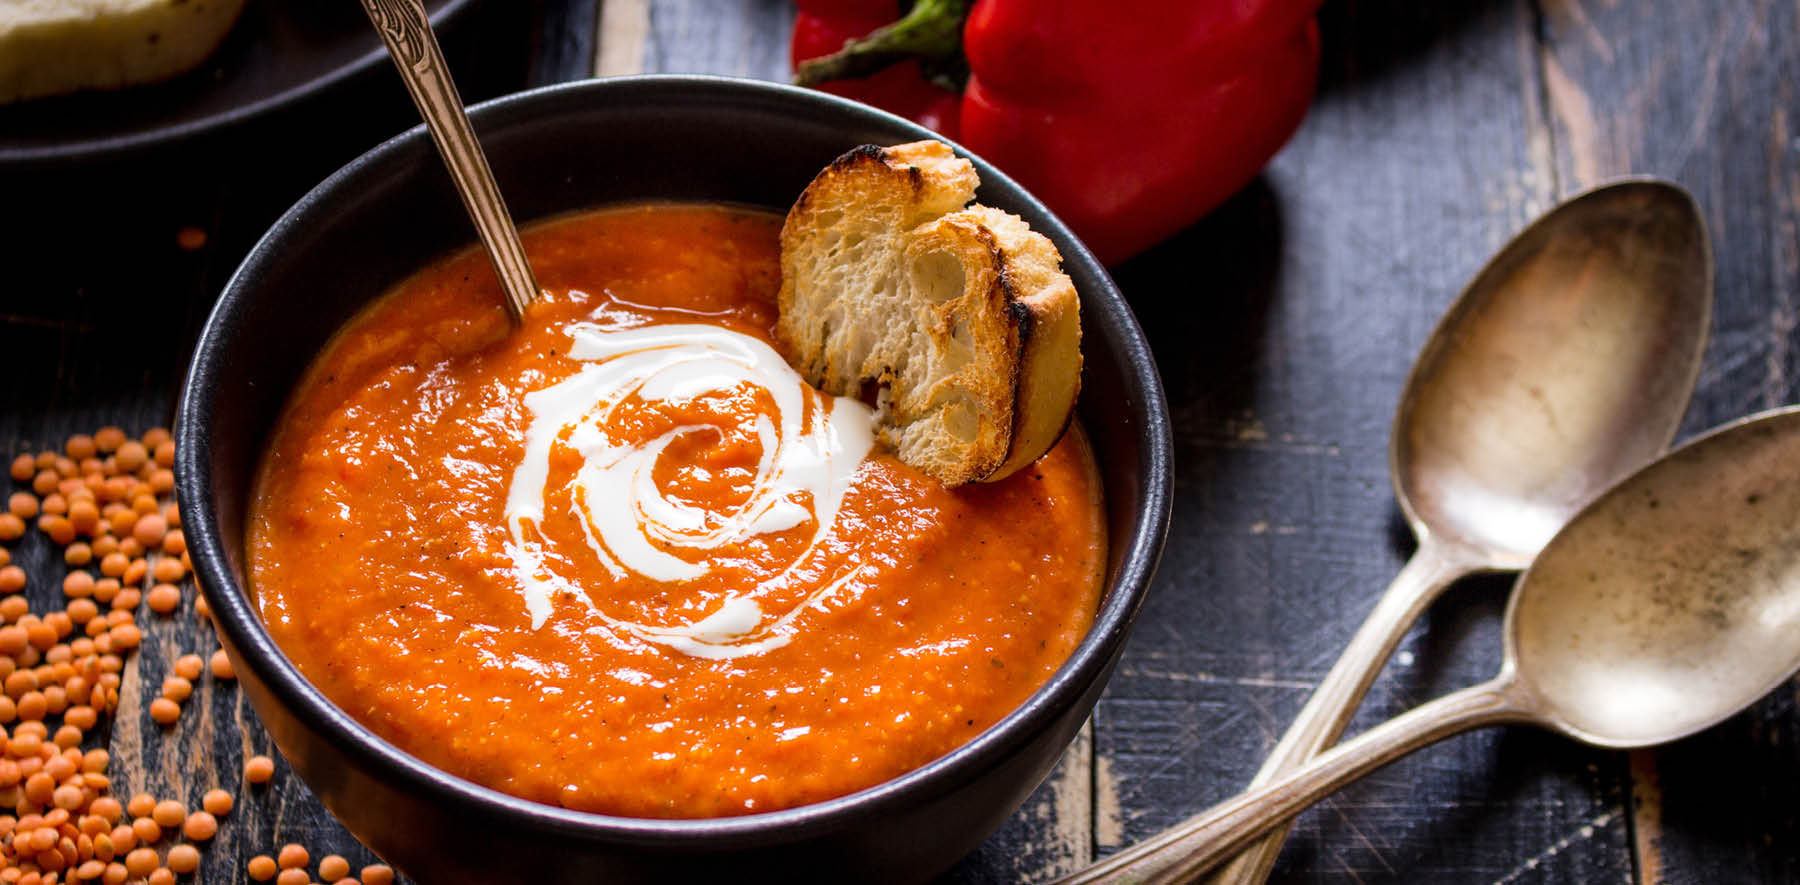 https://drewandcole.com/wp-content/uploads/2019/04/drew-and-cole-pressure-king-pro-roasted-red-pepper-and-tomato-soup-5L-recipe-header.jpg